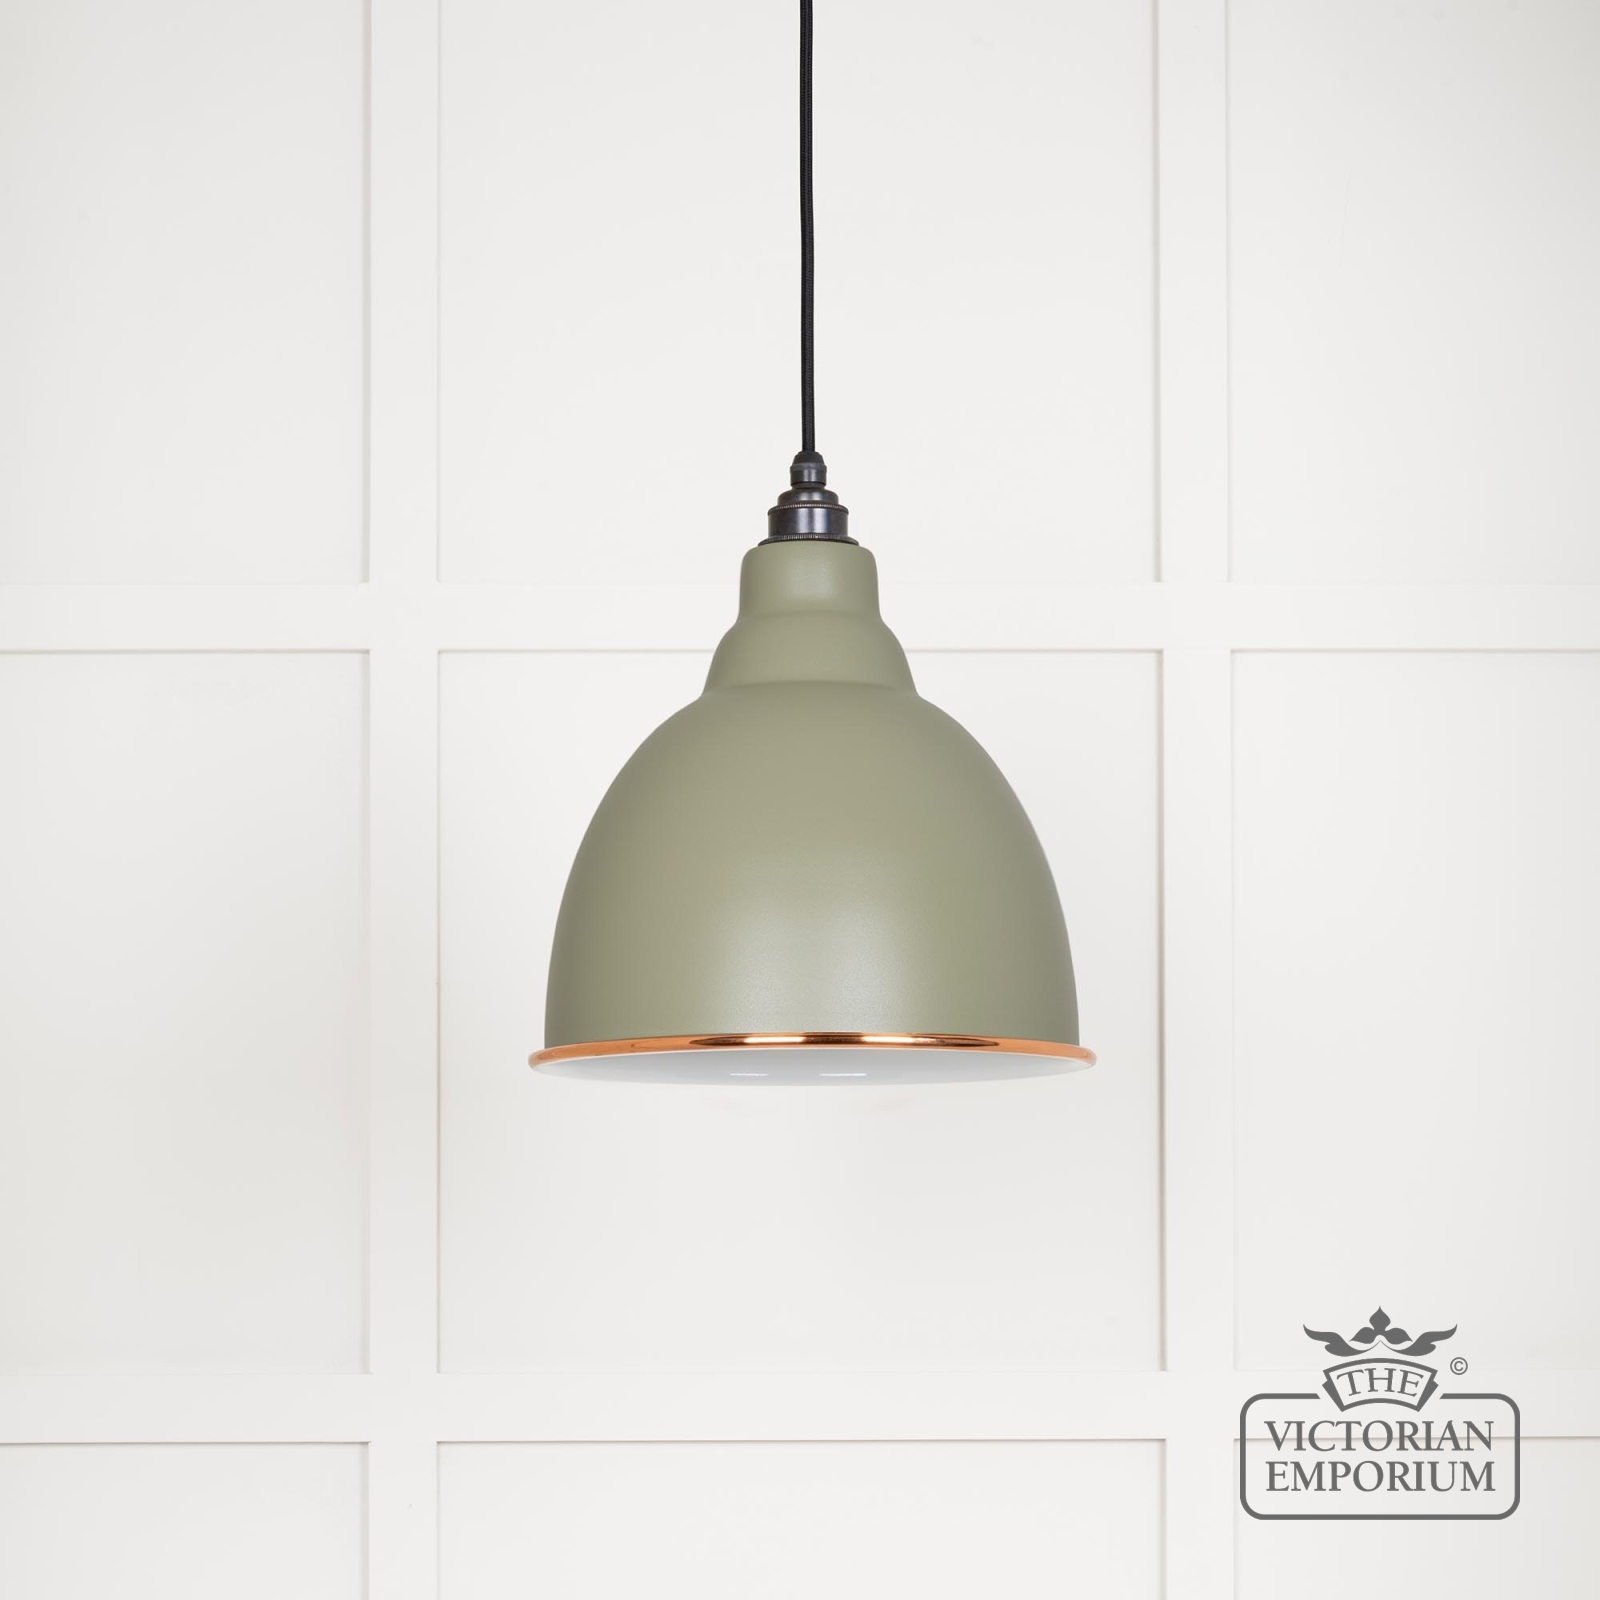 Brindle pendant light in Tump with white gloss interior